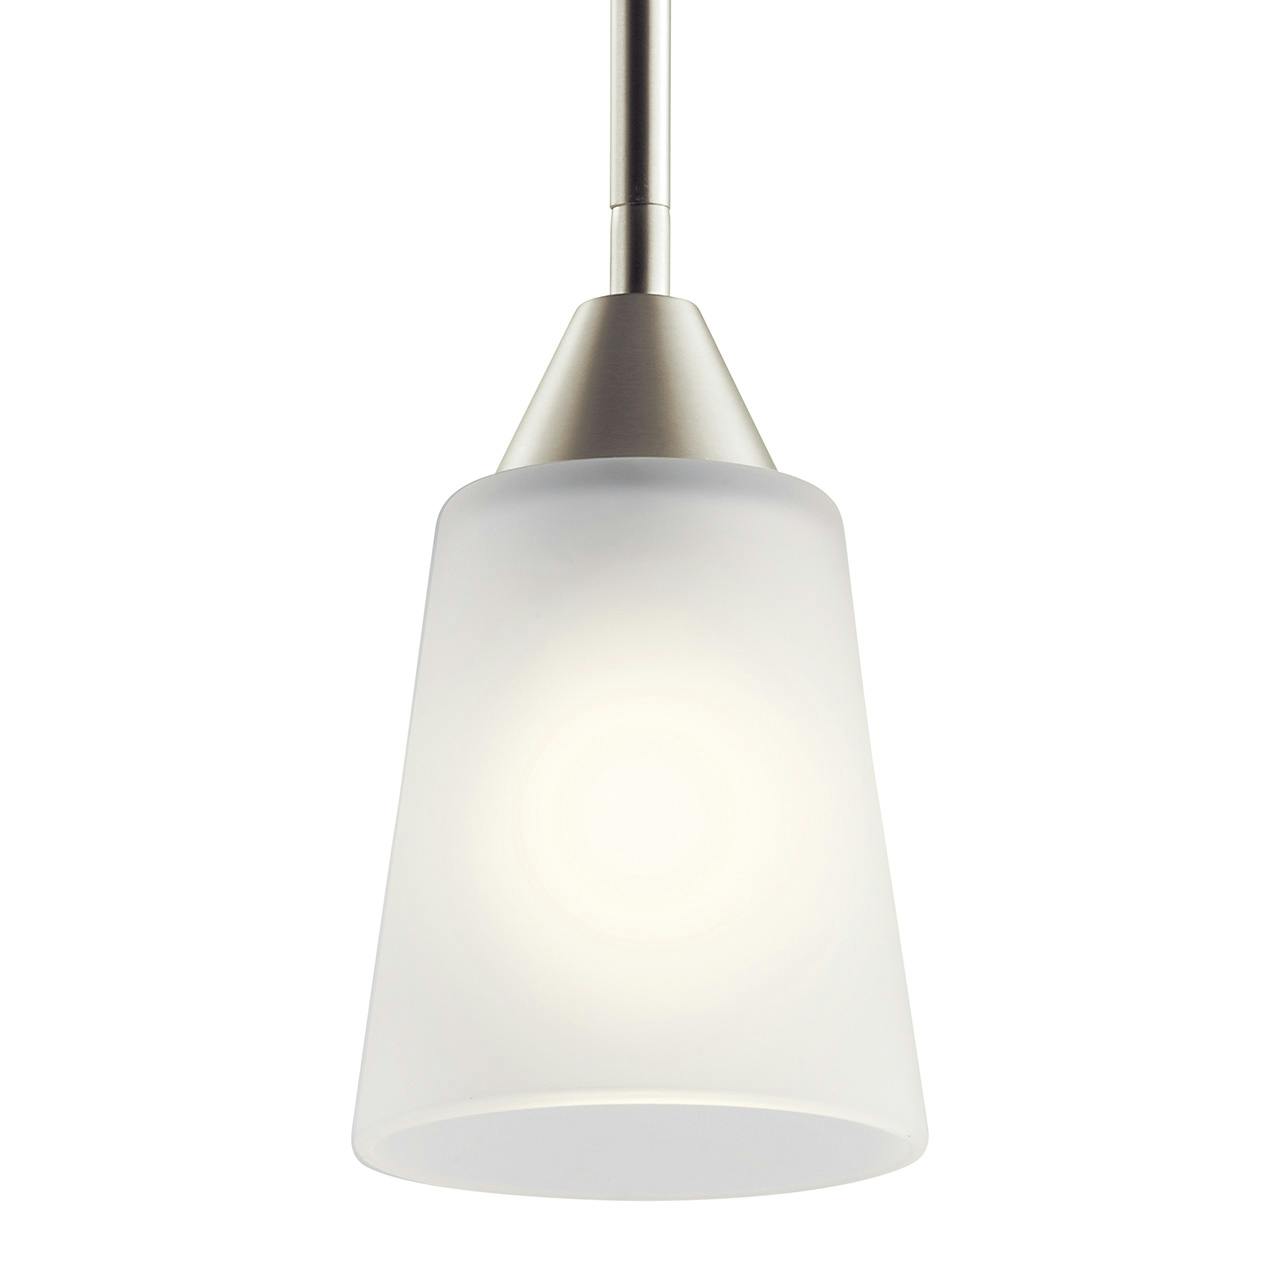 Close up view of the Skagos 1 Light Mini Pendant Nickel on a white background